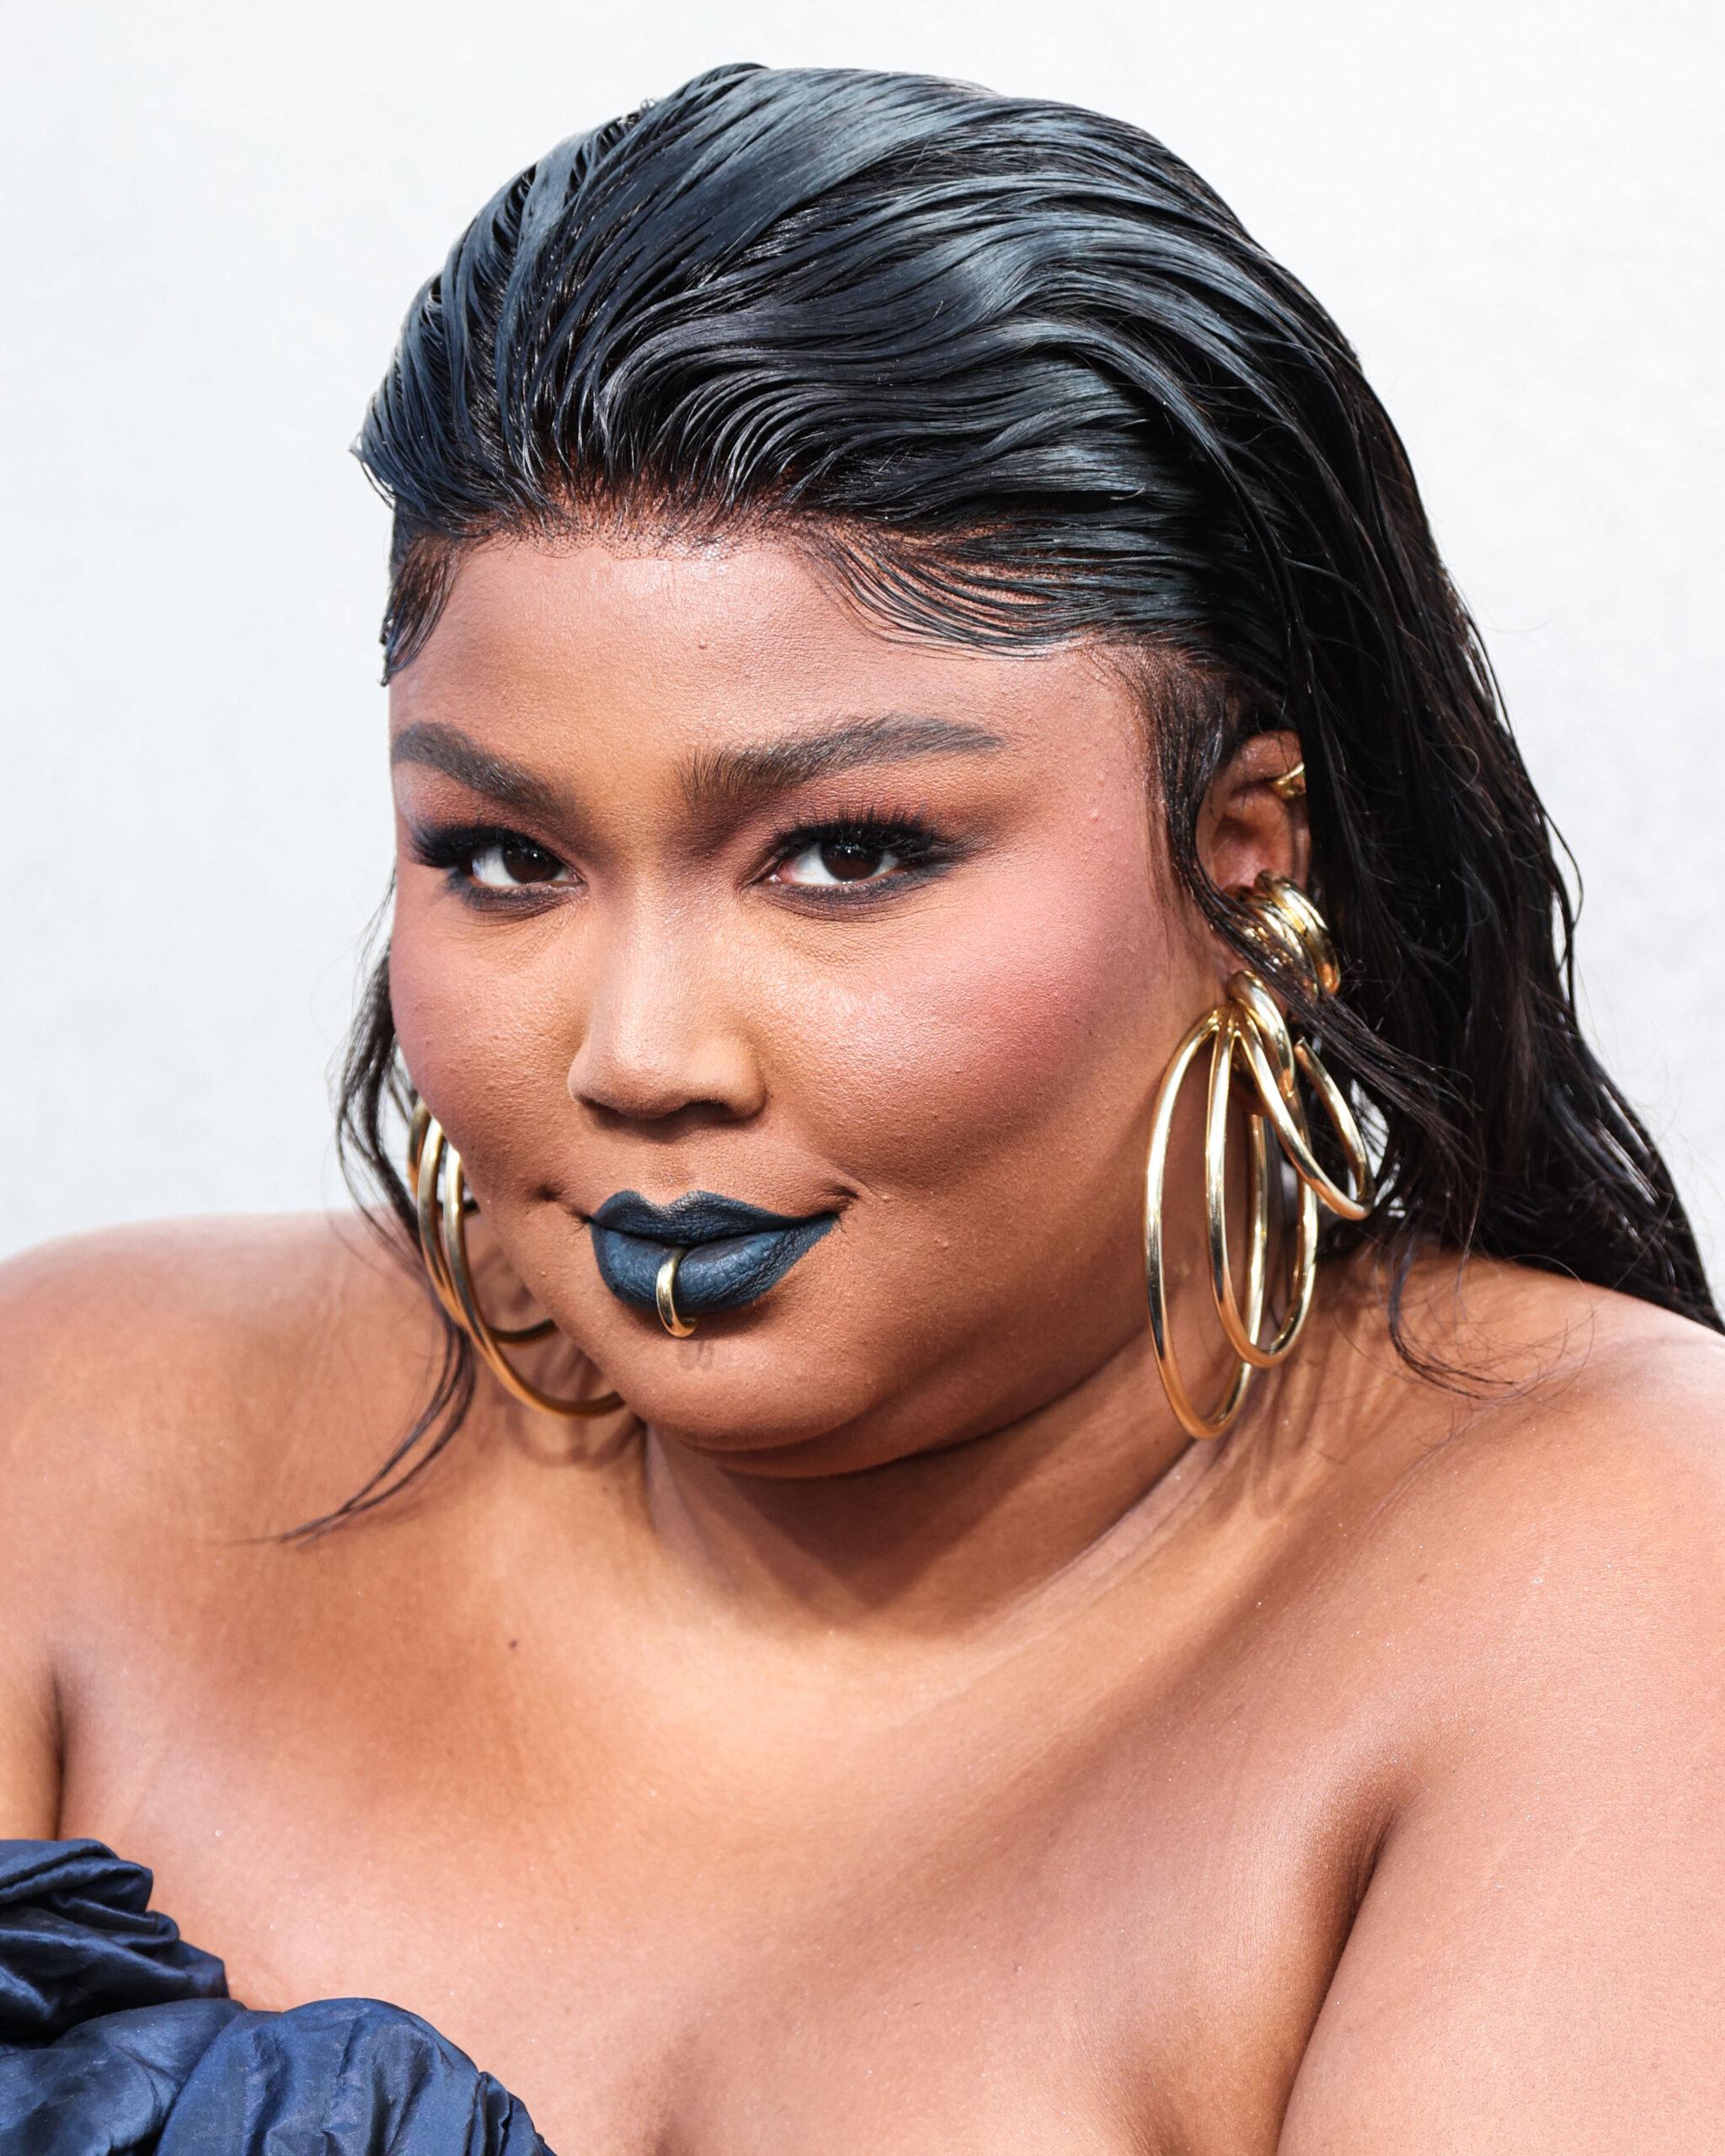 ///Lizzo scaled